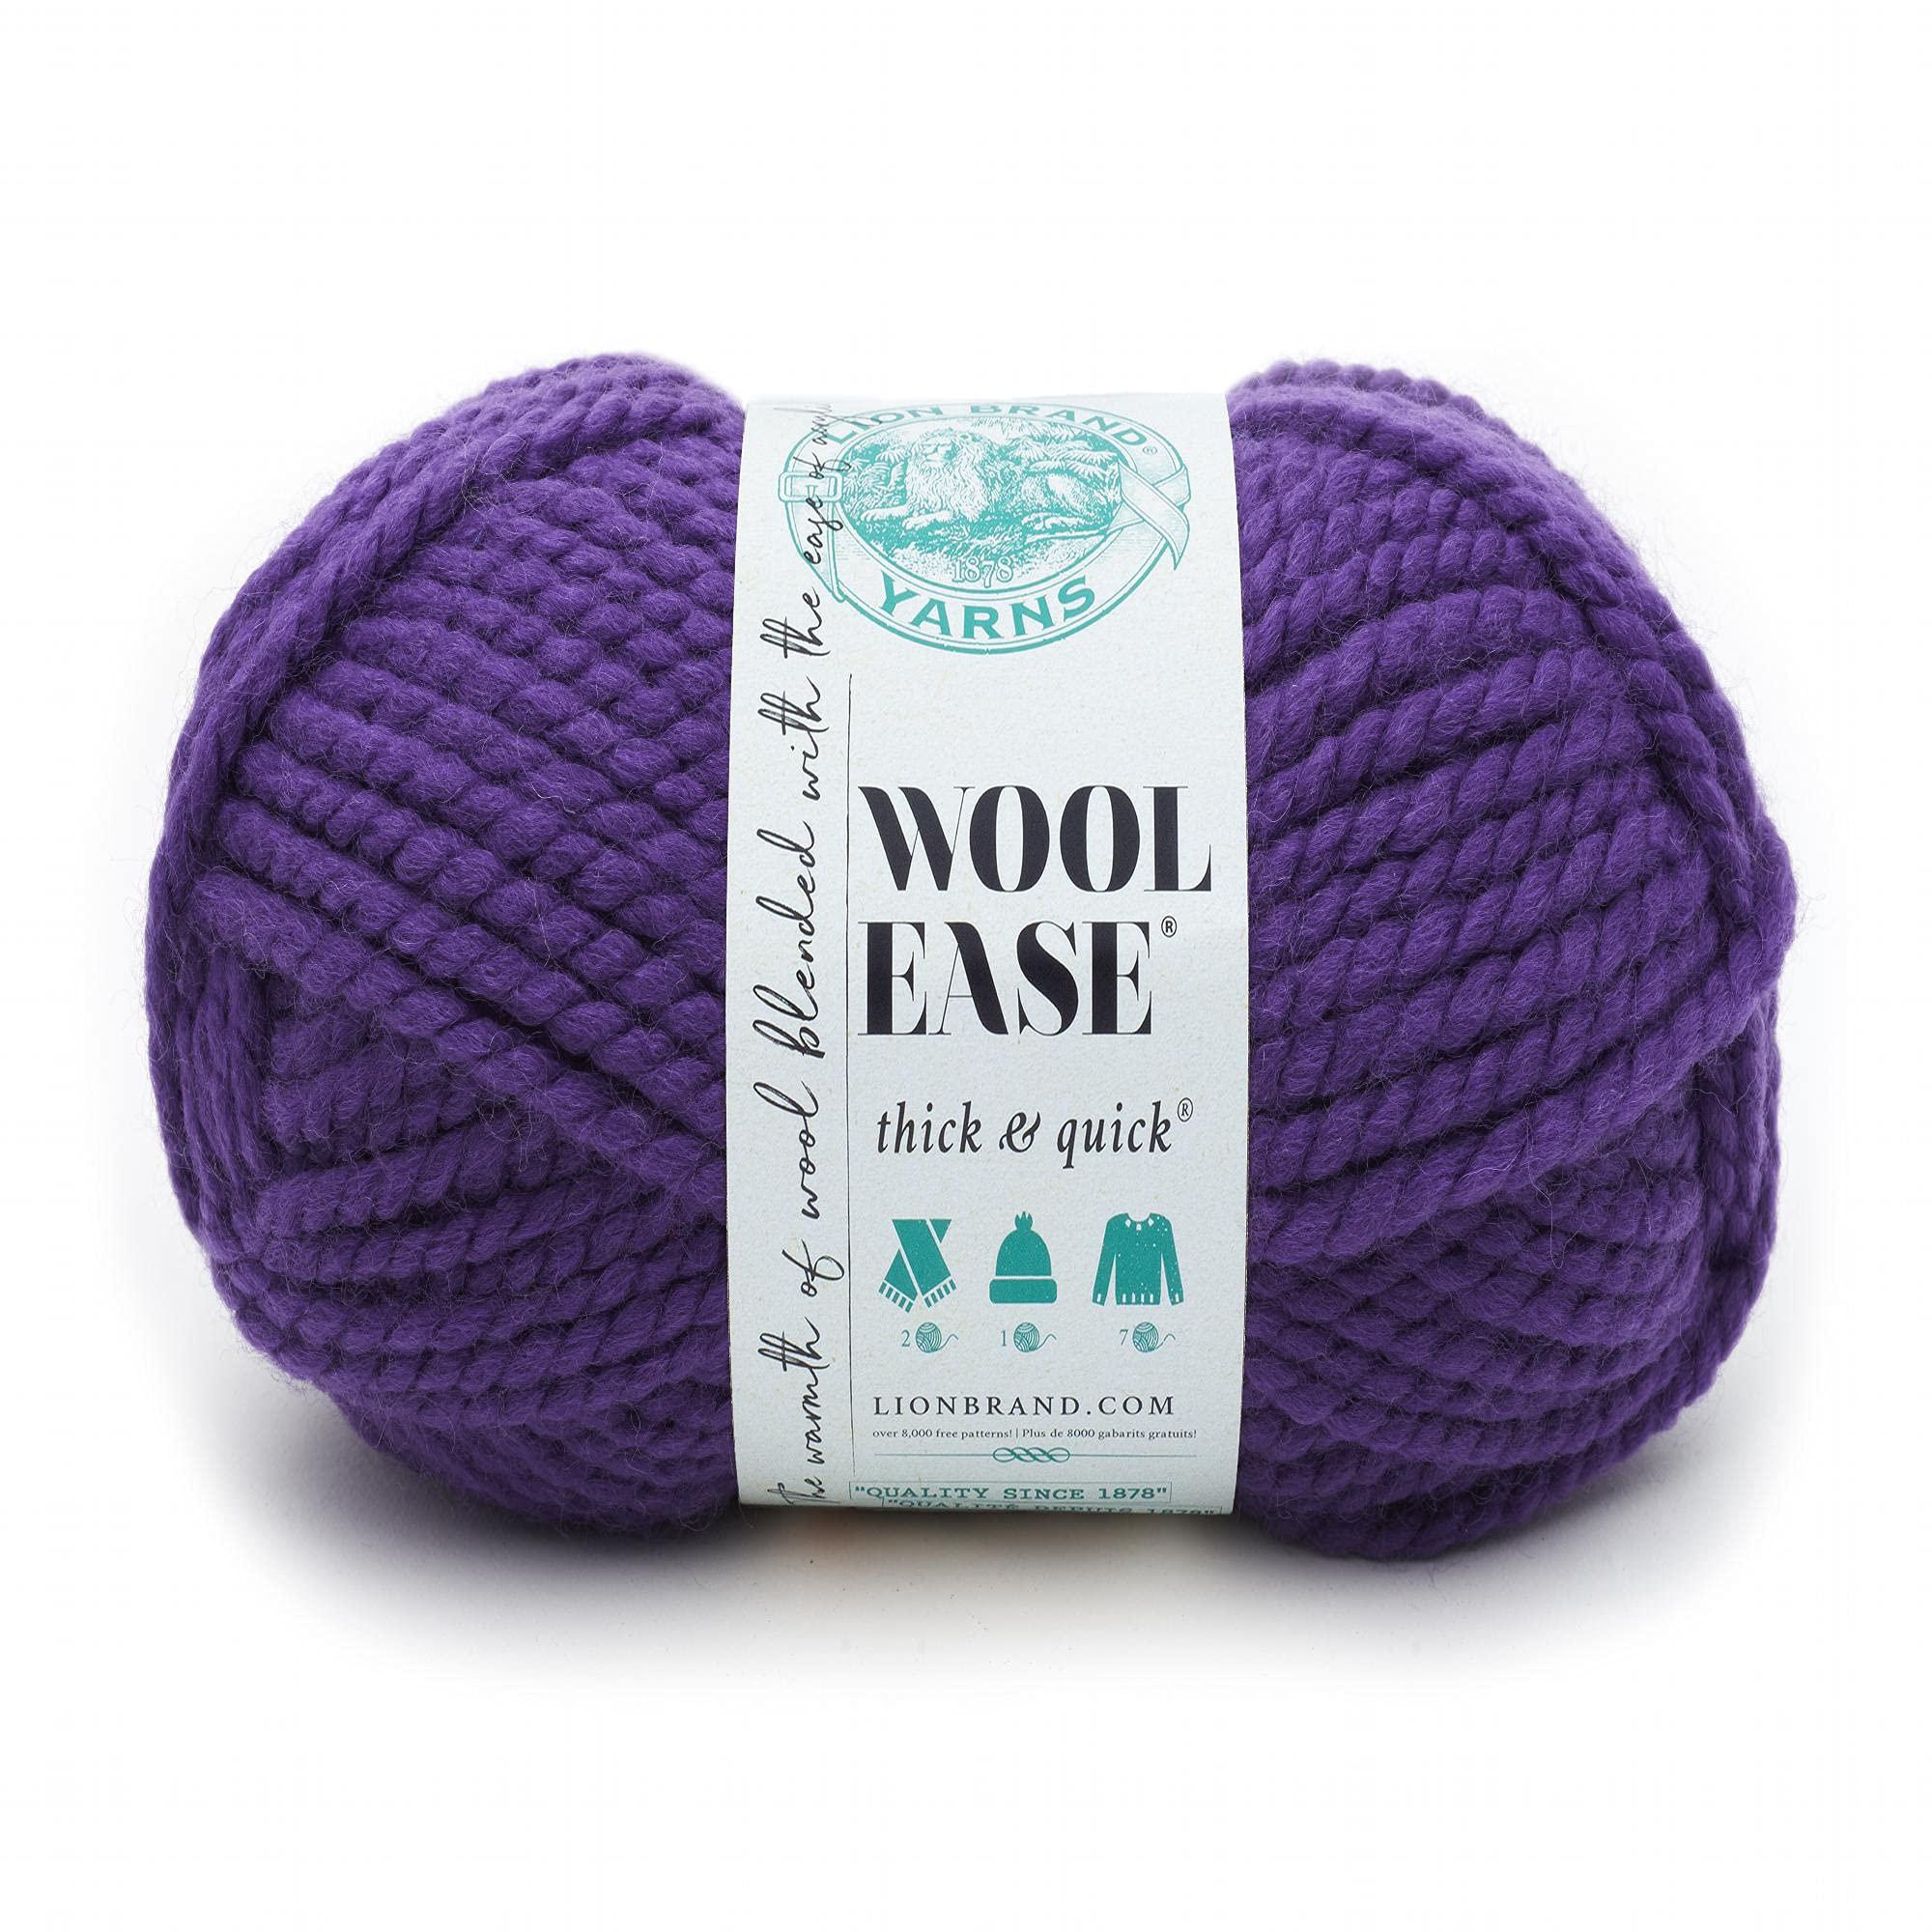 Lion Brand Yarn lion brand yarn wool-ease thick & quick yarn, soft and  bulky yarn for knitting, crocheting, and crafting, 1 skein, iris